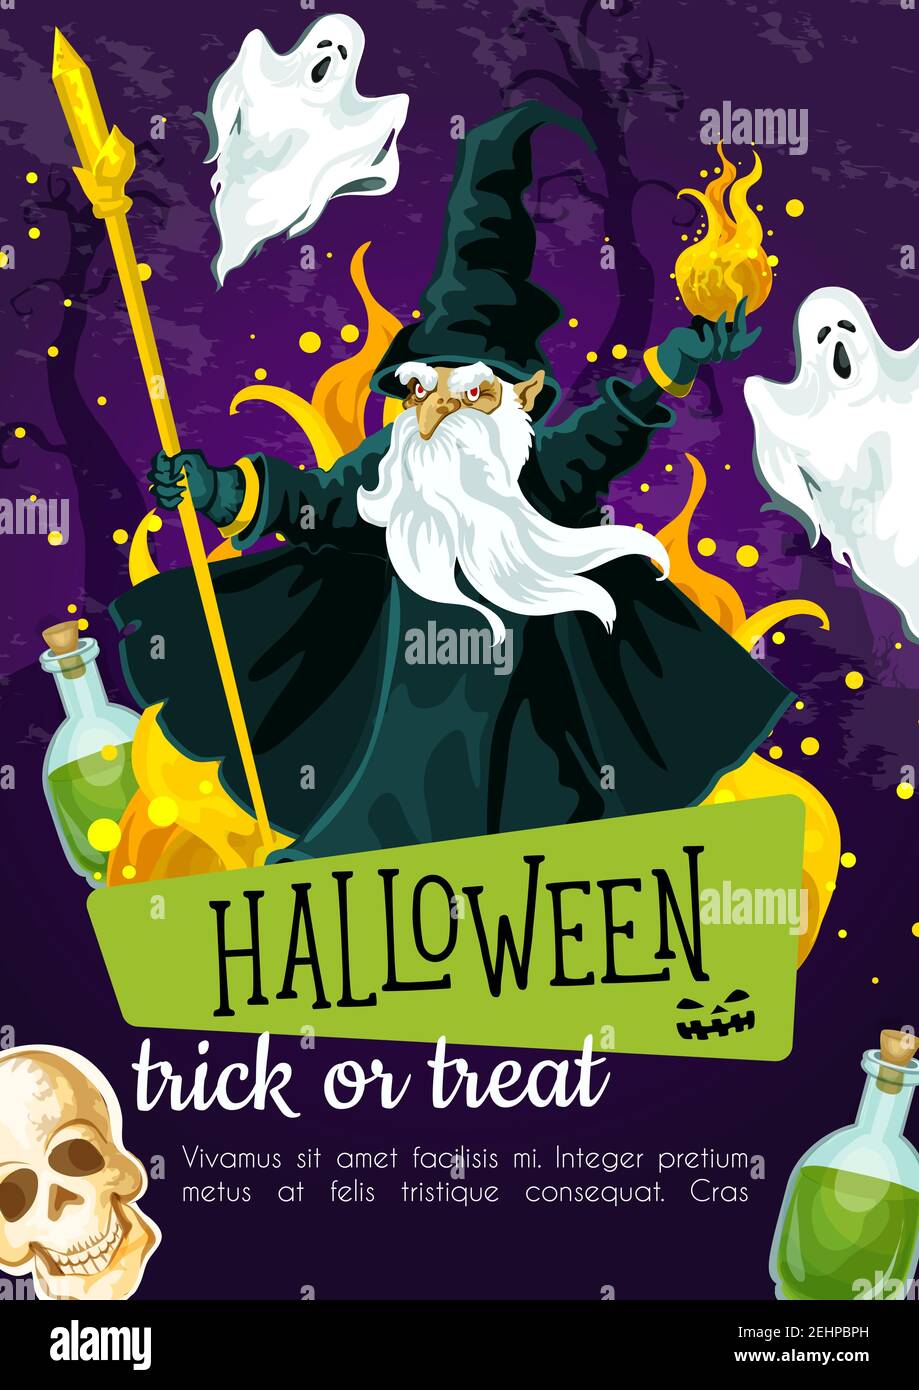 Halloween greeting poster with evil wizard. Fear magician with fireball and stick festive banner, adorned by spooky ghost, skeleton skull and potion b Stock Vector